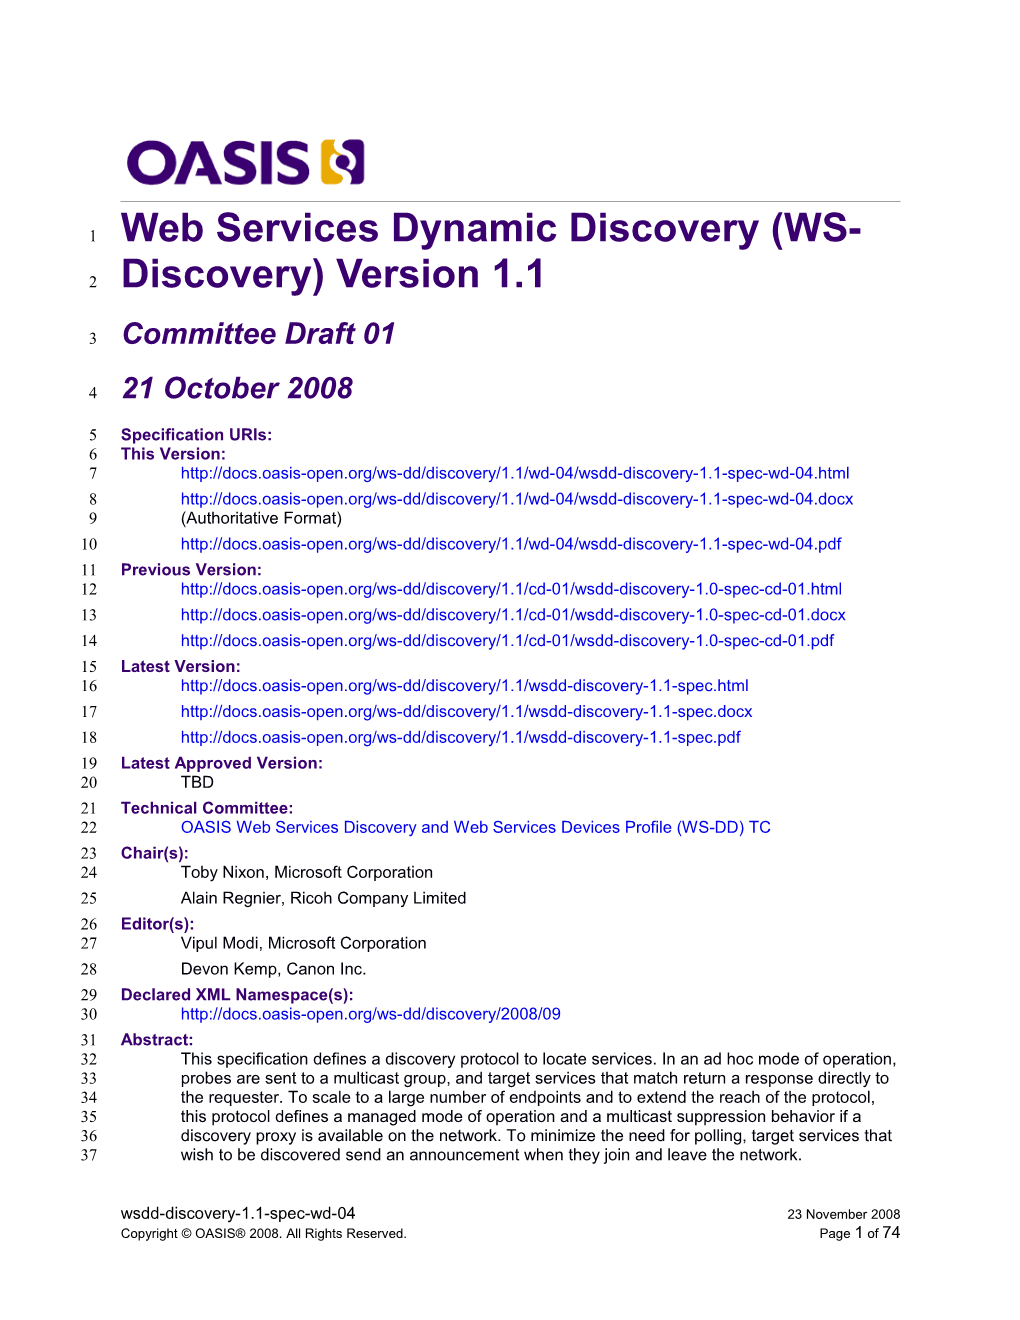 Web Services Dynamic Discovery (WS-Discovery) Version 1.0